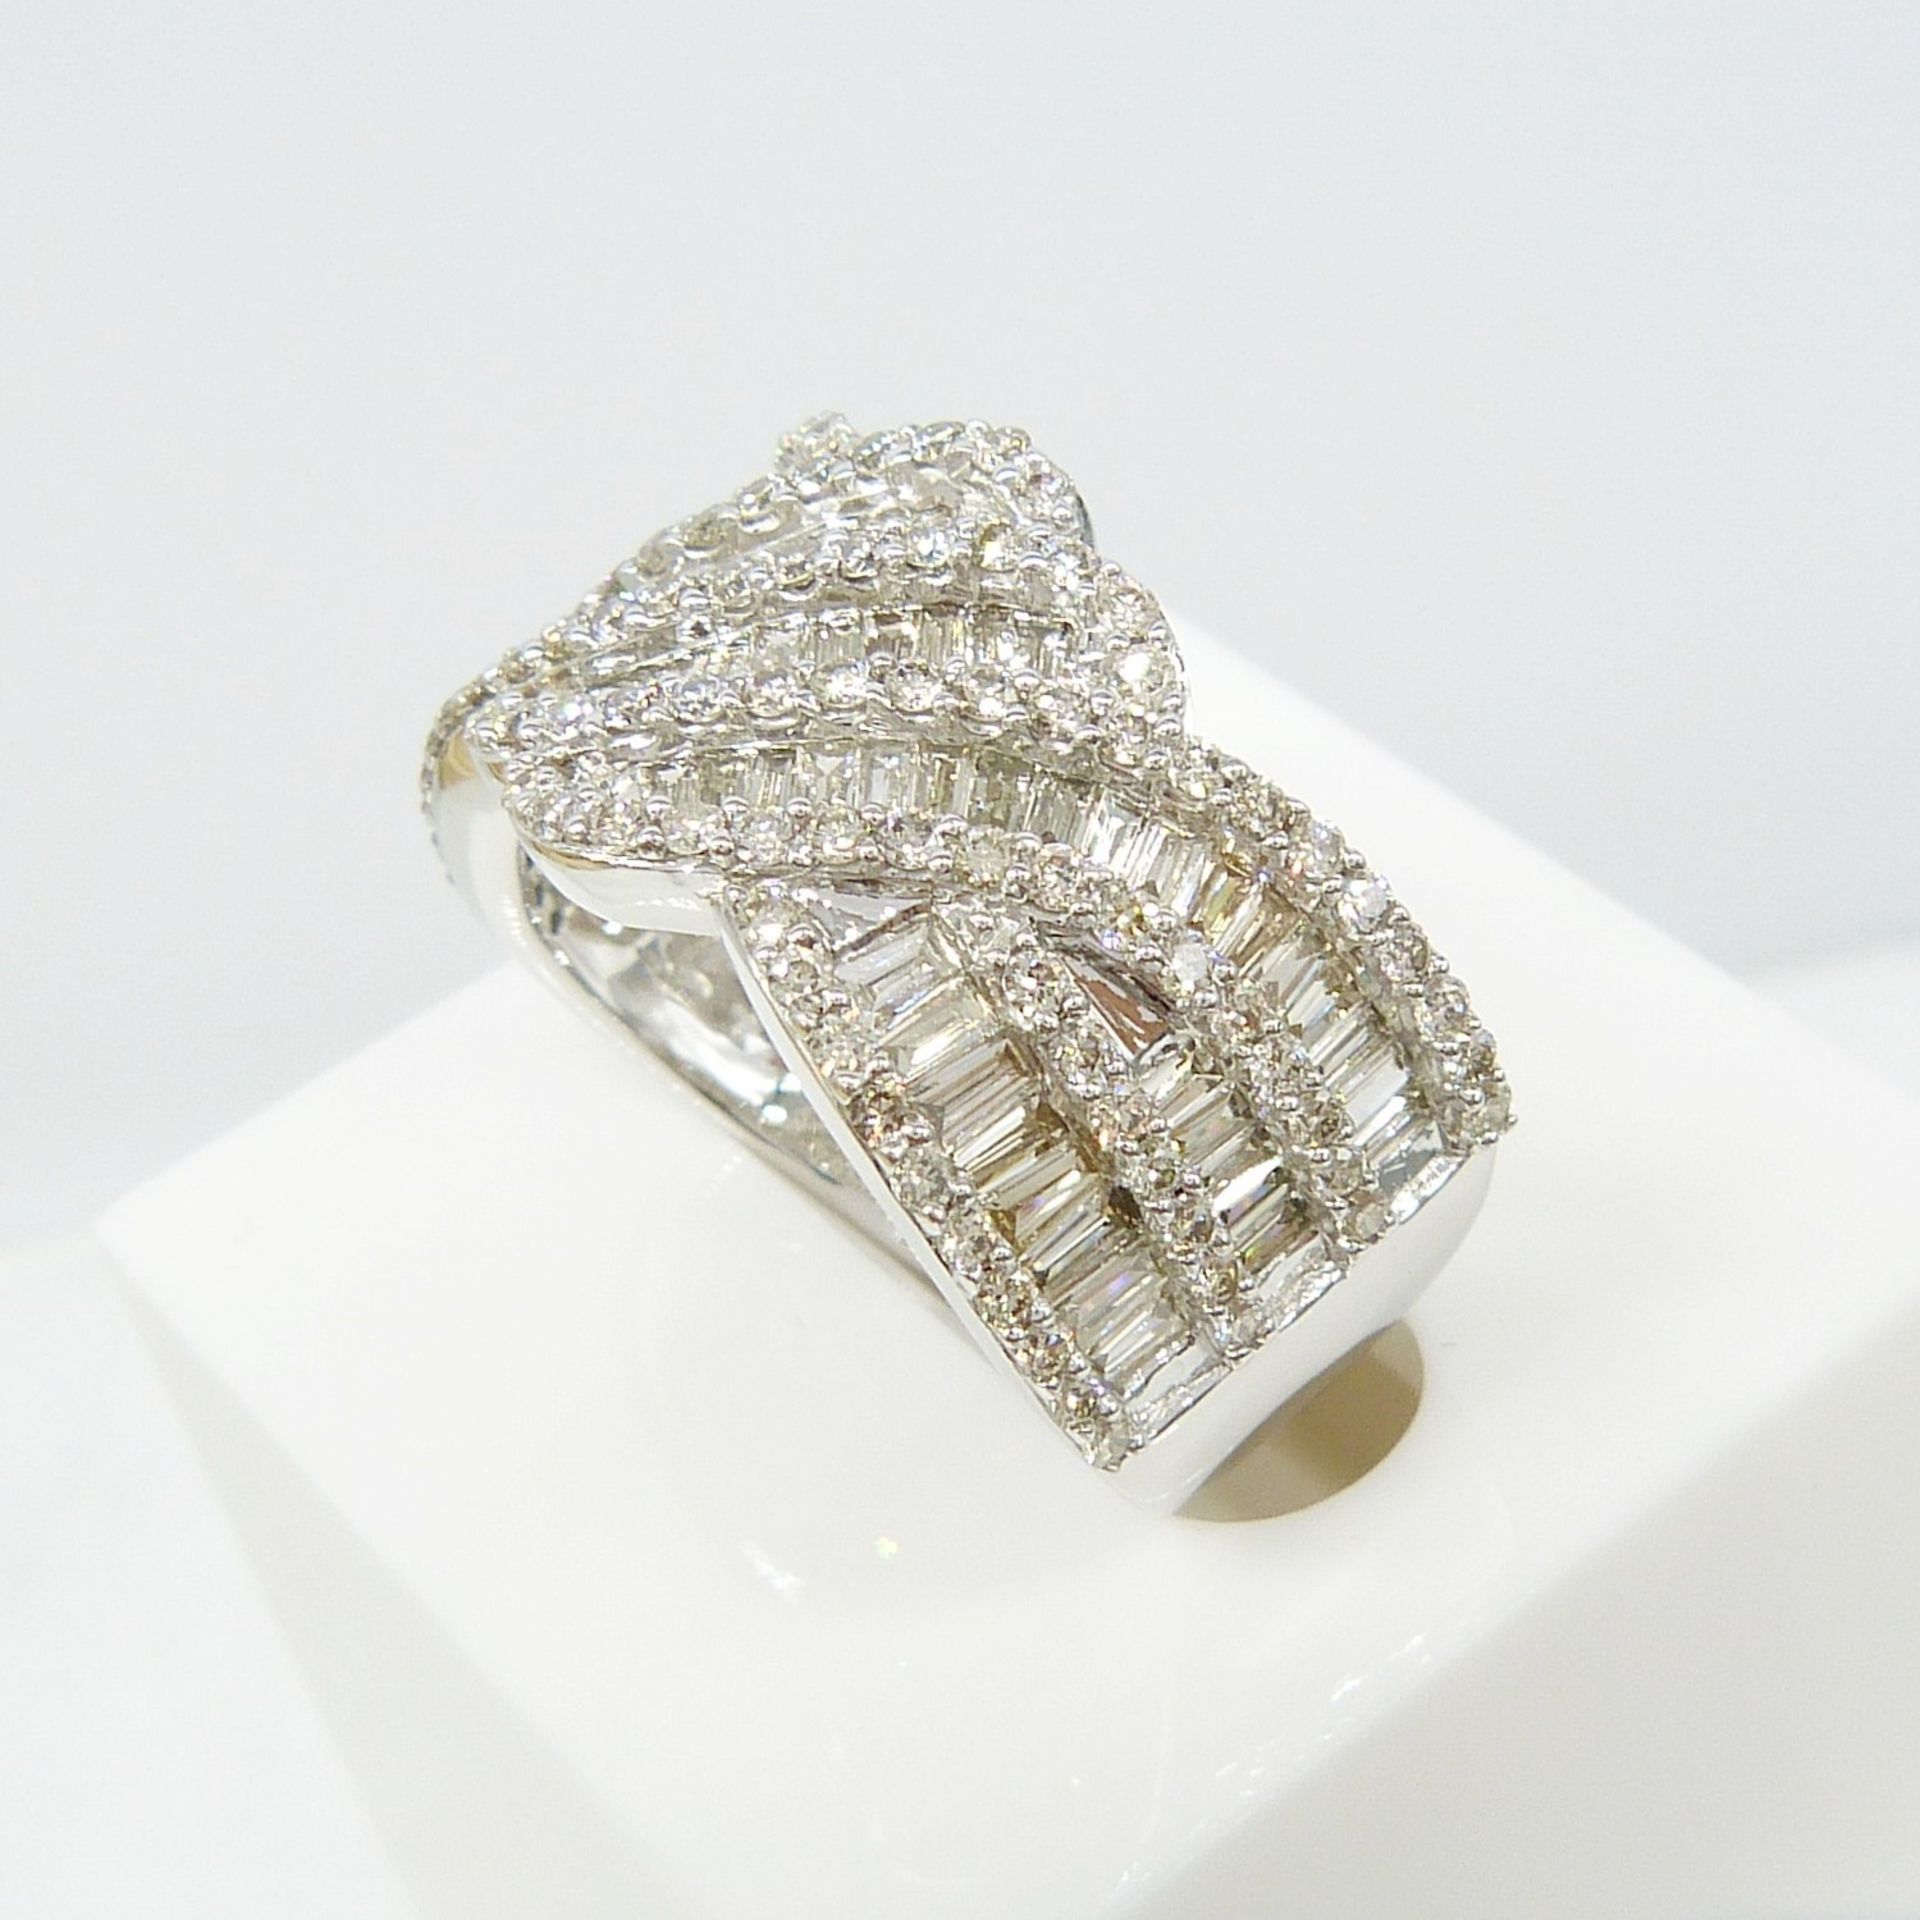 Large, Weighty Wave-style 2.00 Carat Diamond Cocktail Ring In White Gold - Image 3 of 6